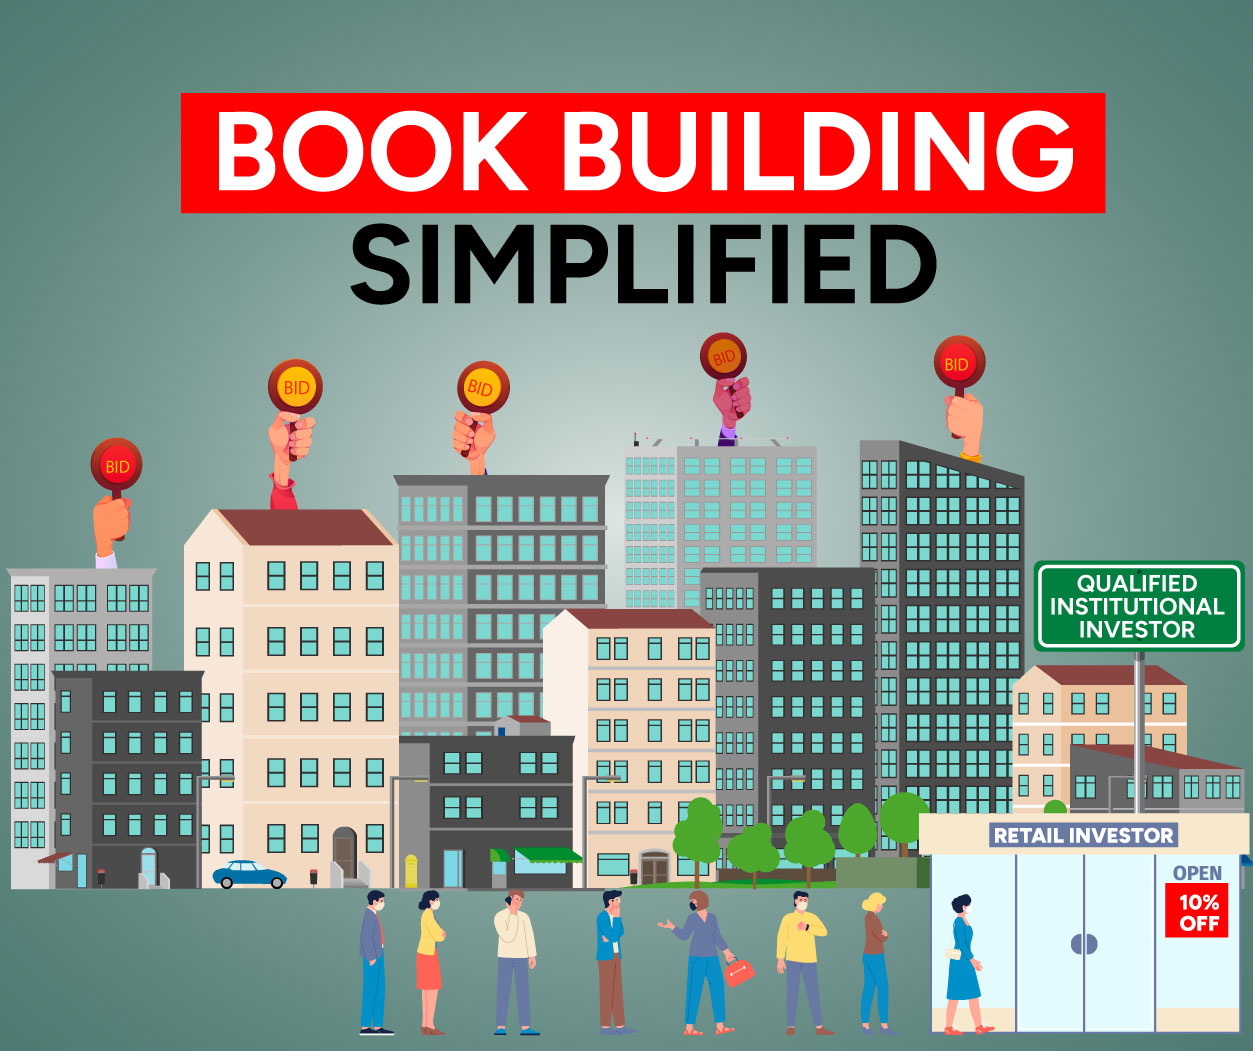 A Simplified Guide to Book Building Method